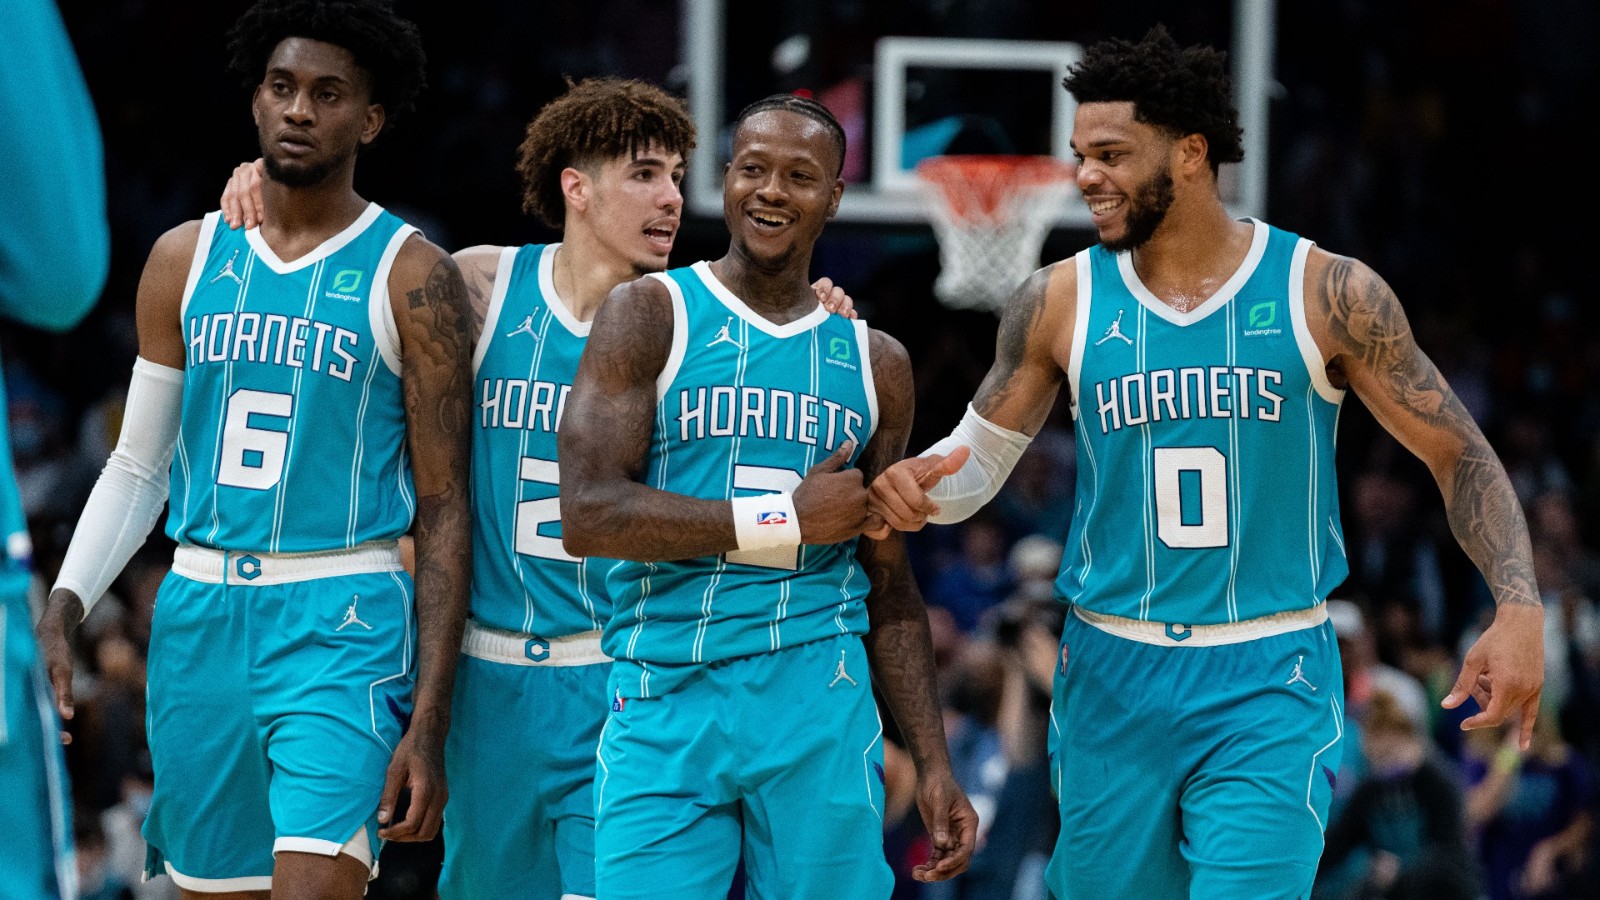 the-charlotte-hornets-picked-up-a-big-win-over-golden-state-with-a-strong-defensive-effort-in-the-fourth-quarter_9qdh948lg3ga14iph4ii1806k.jpg